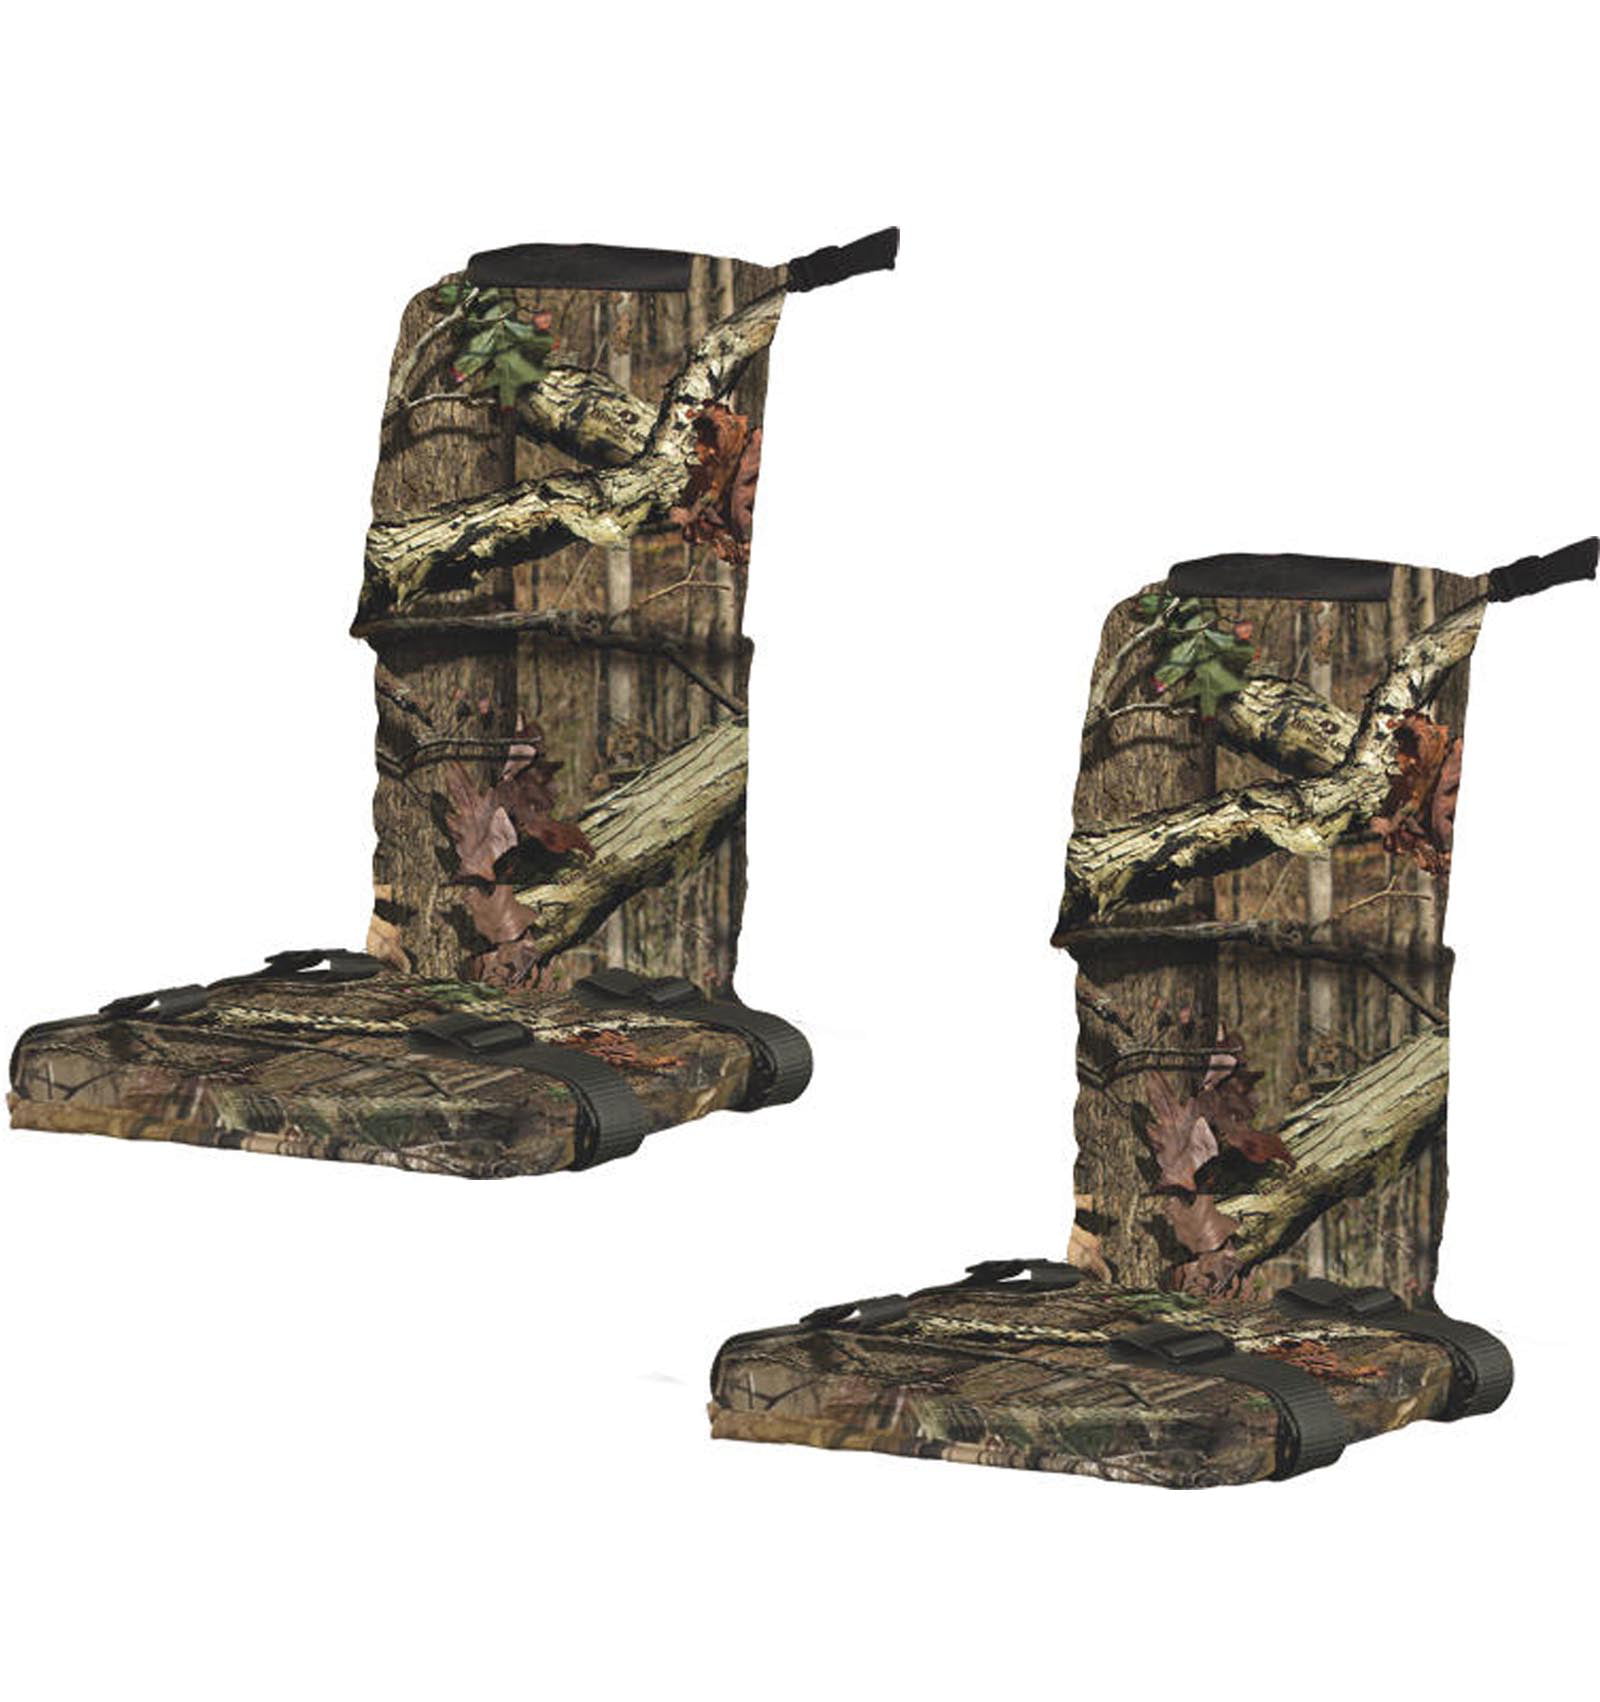 Outdoor Sport Hunting climbing tree stands Universal Seat Chair Mossy Oak Camo 